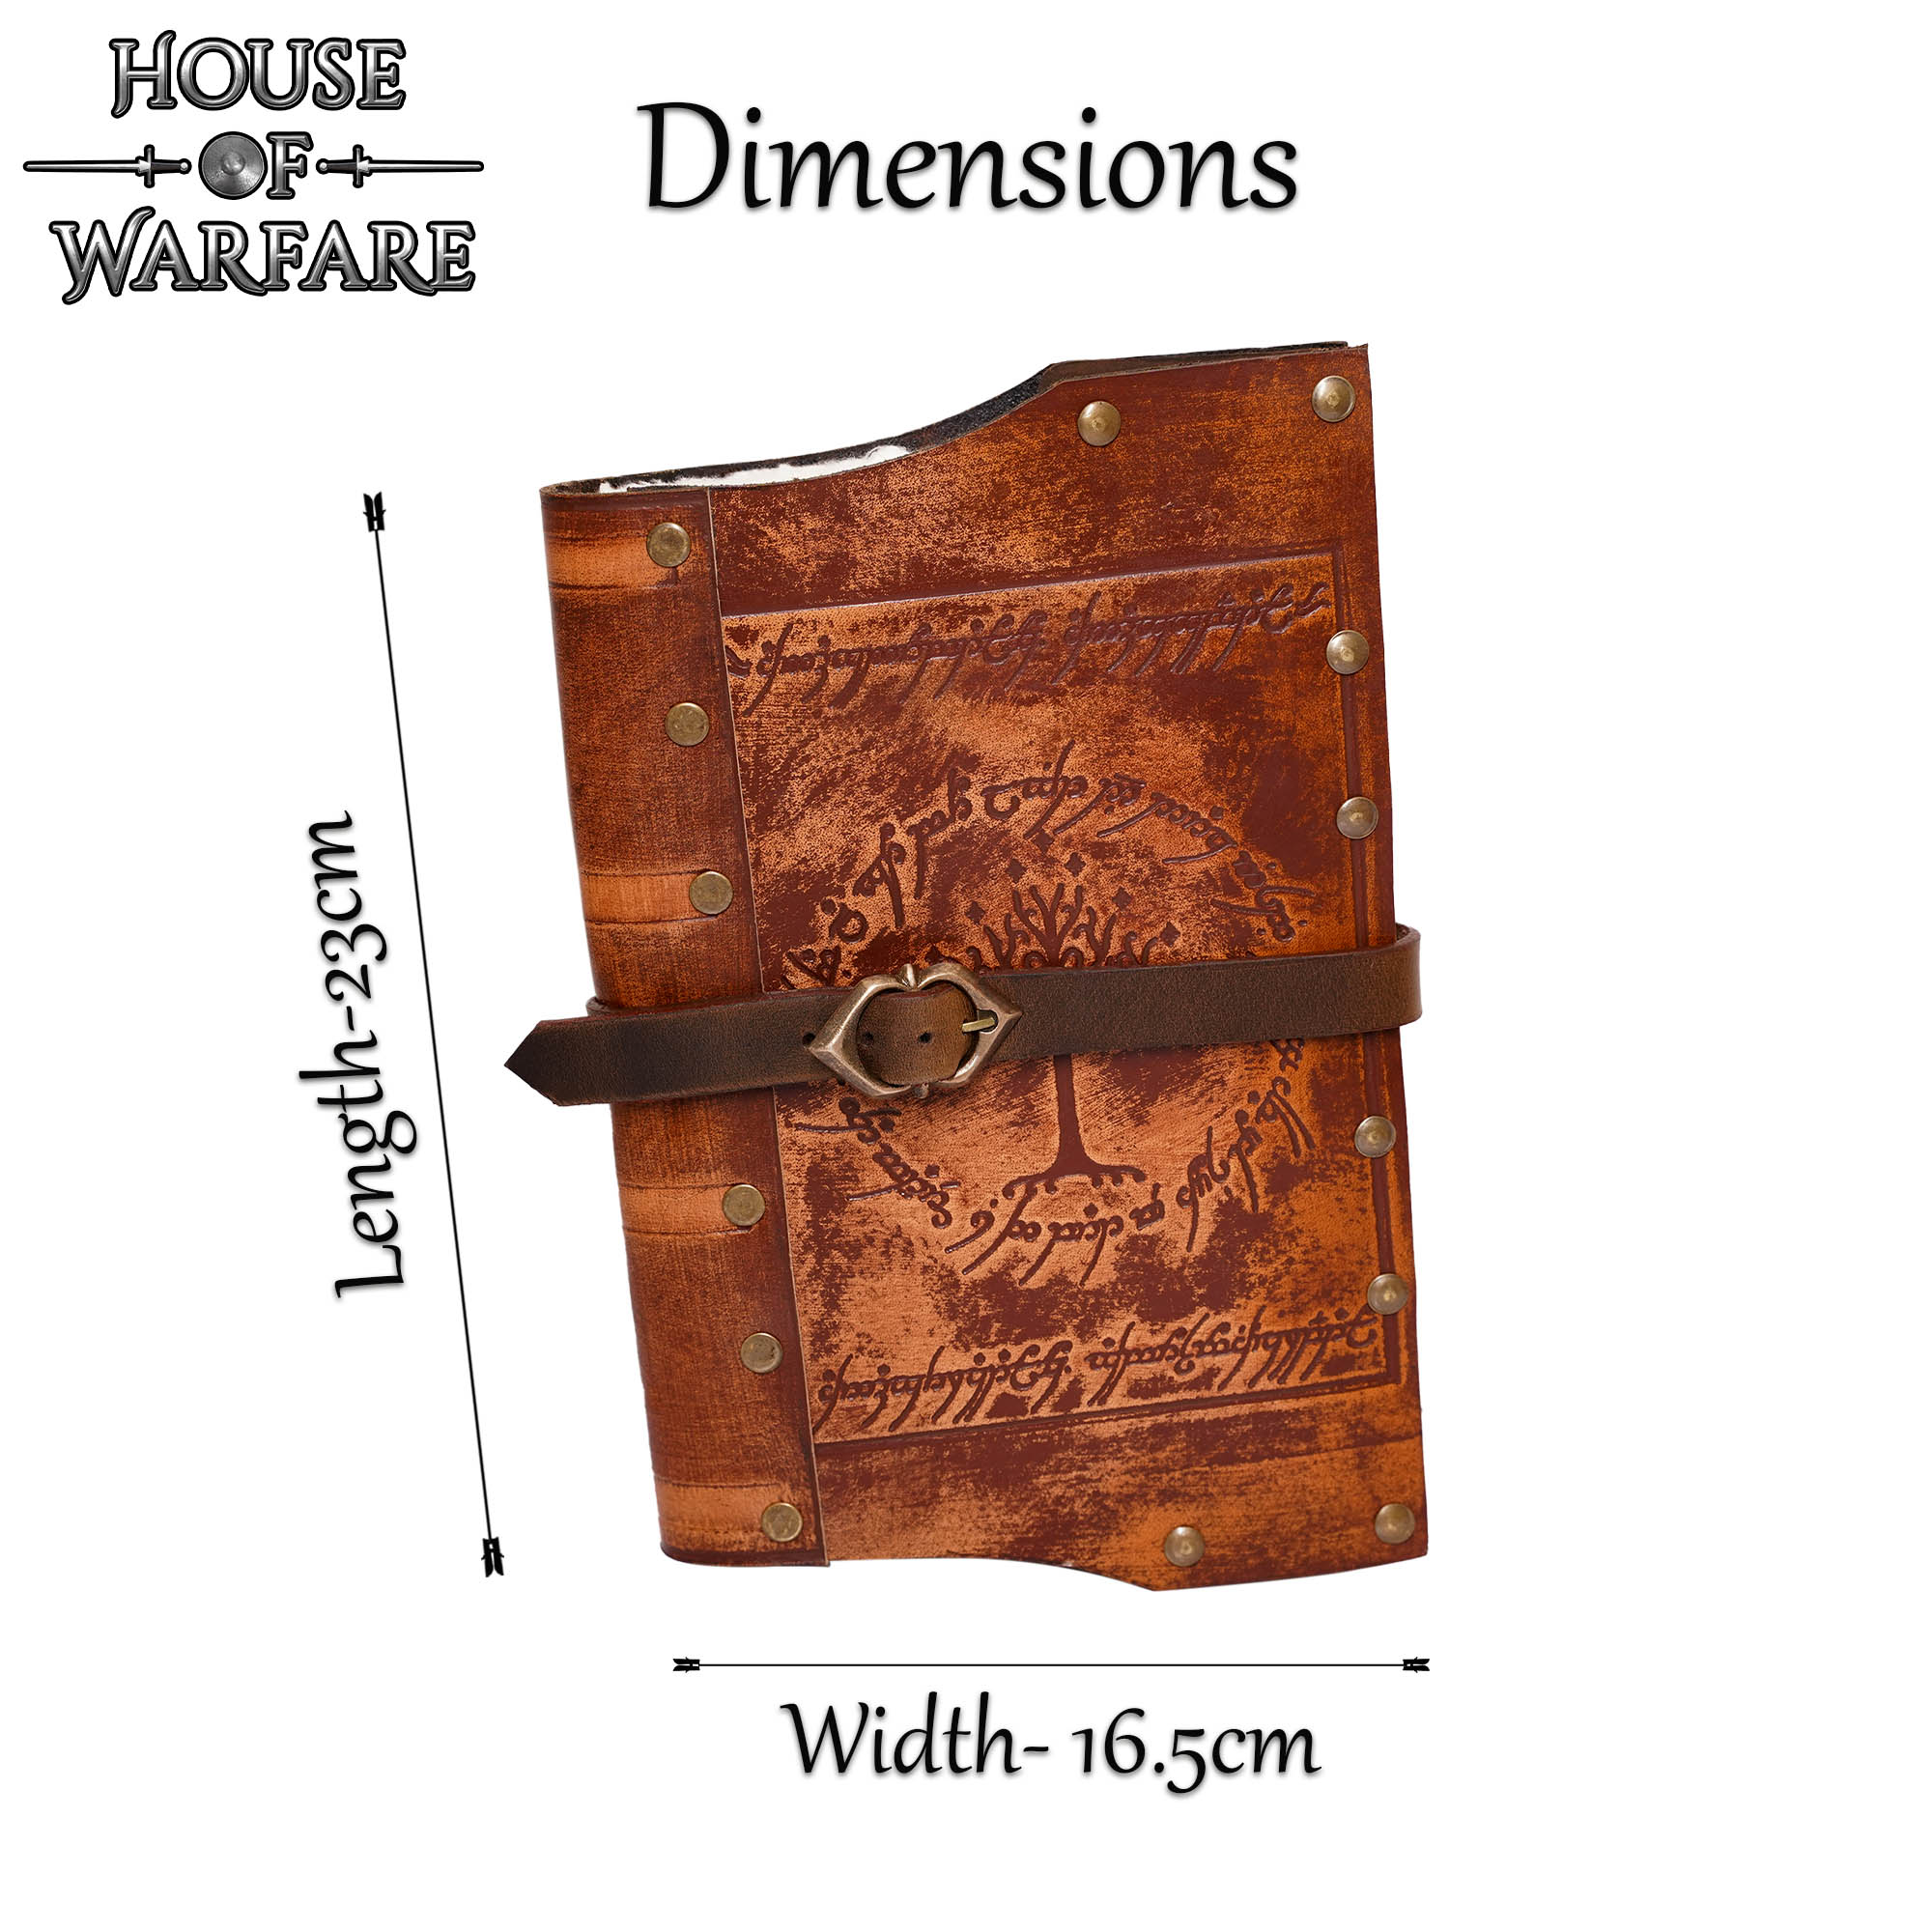 Middle-earth leather journal